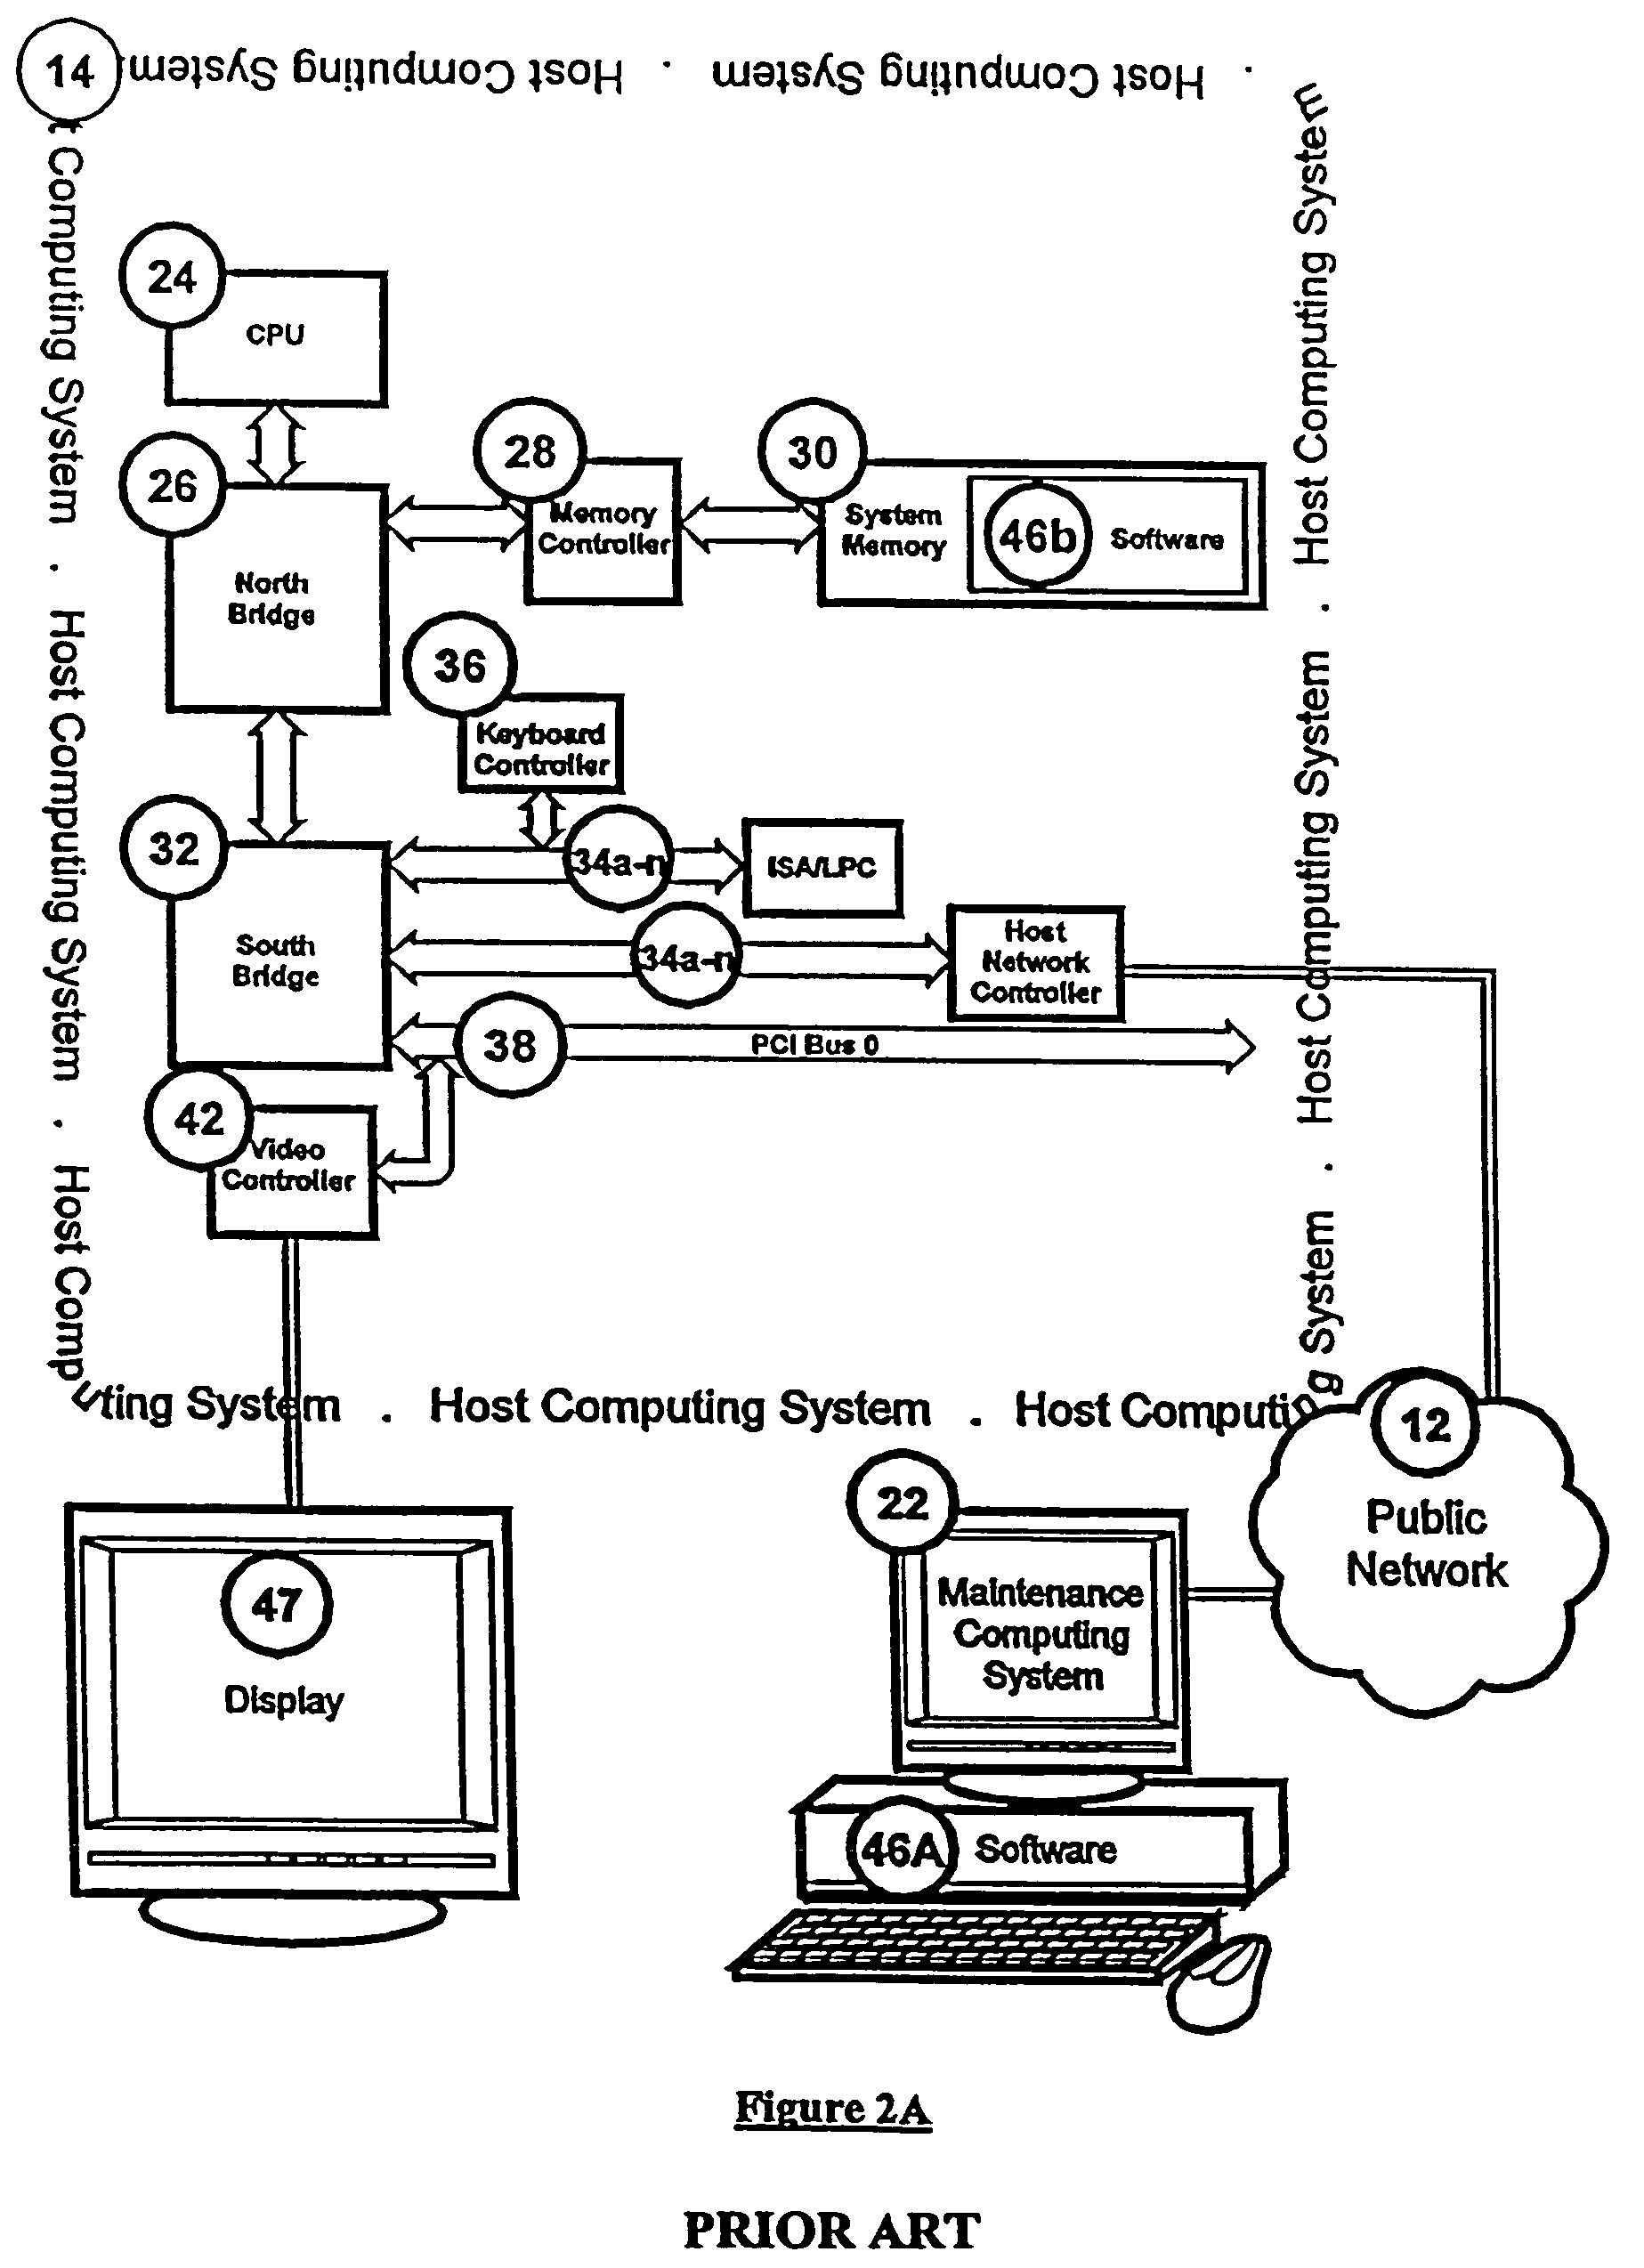 Systems and methods for capturing screen displays from a host computing system for display at a remote terminal